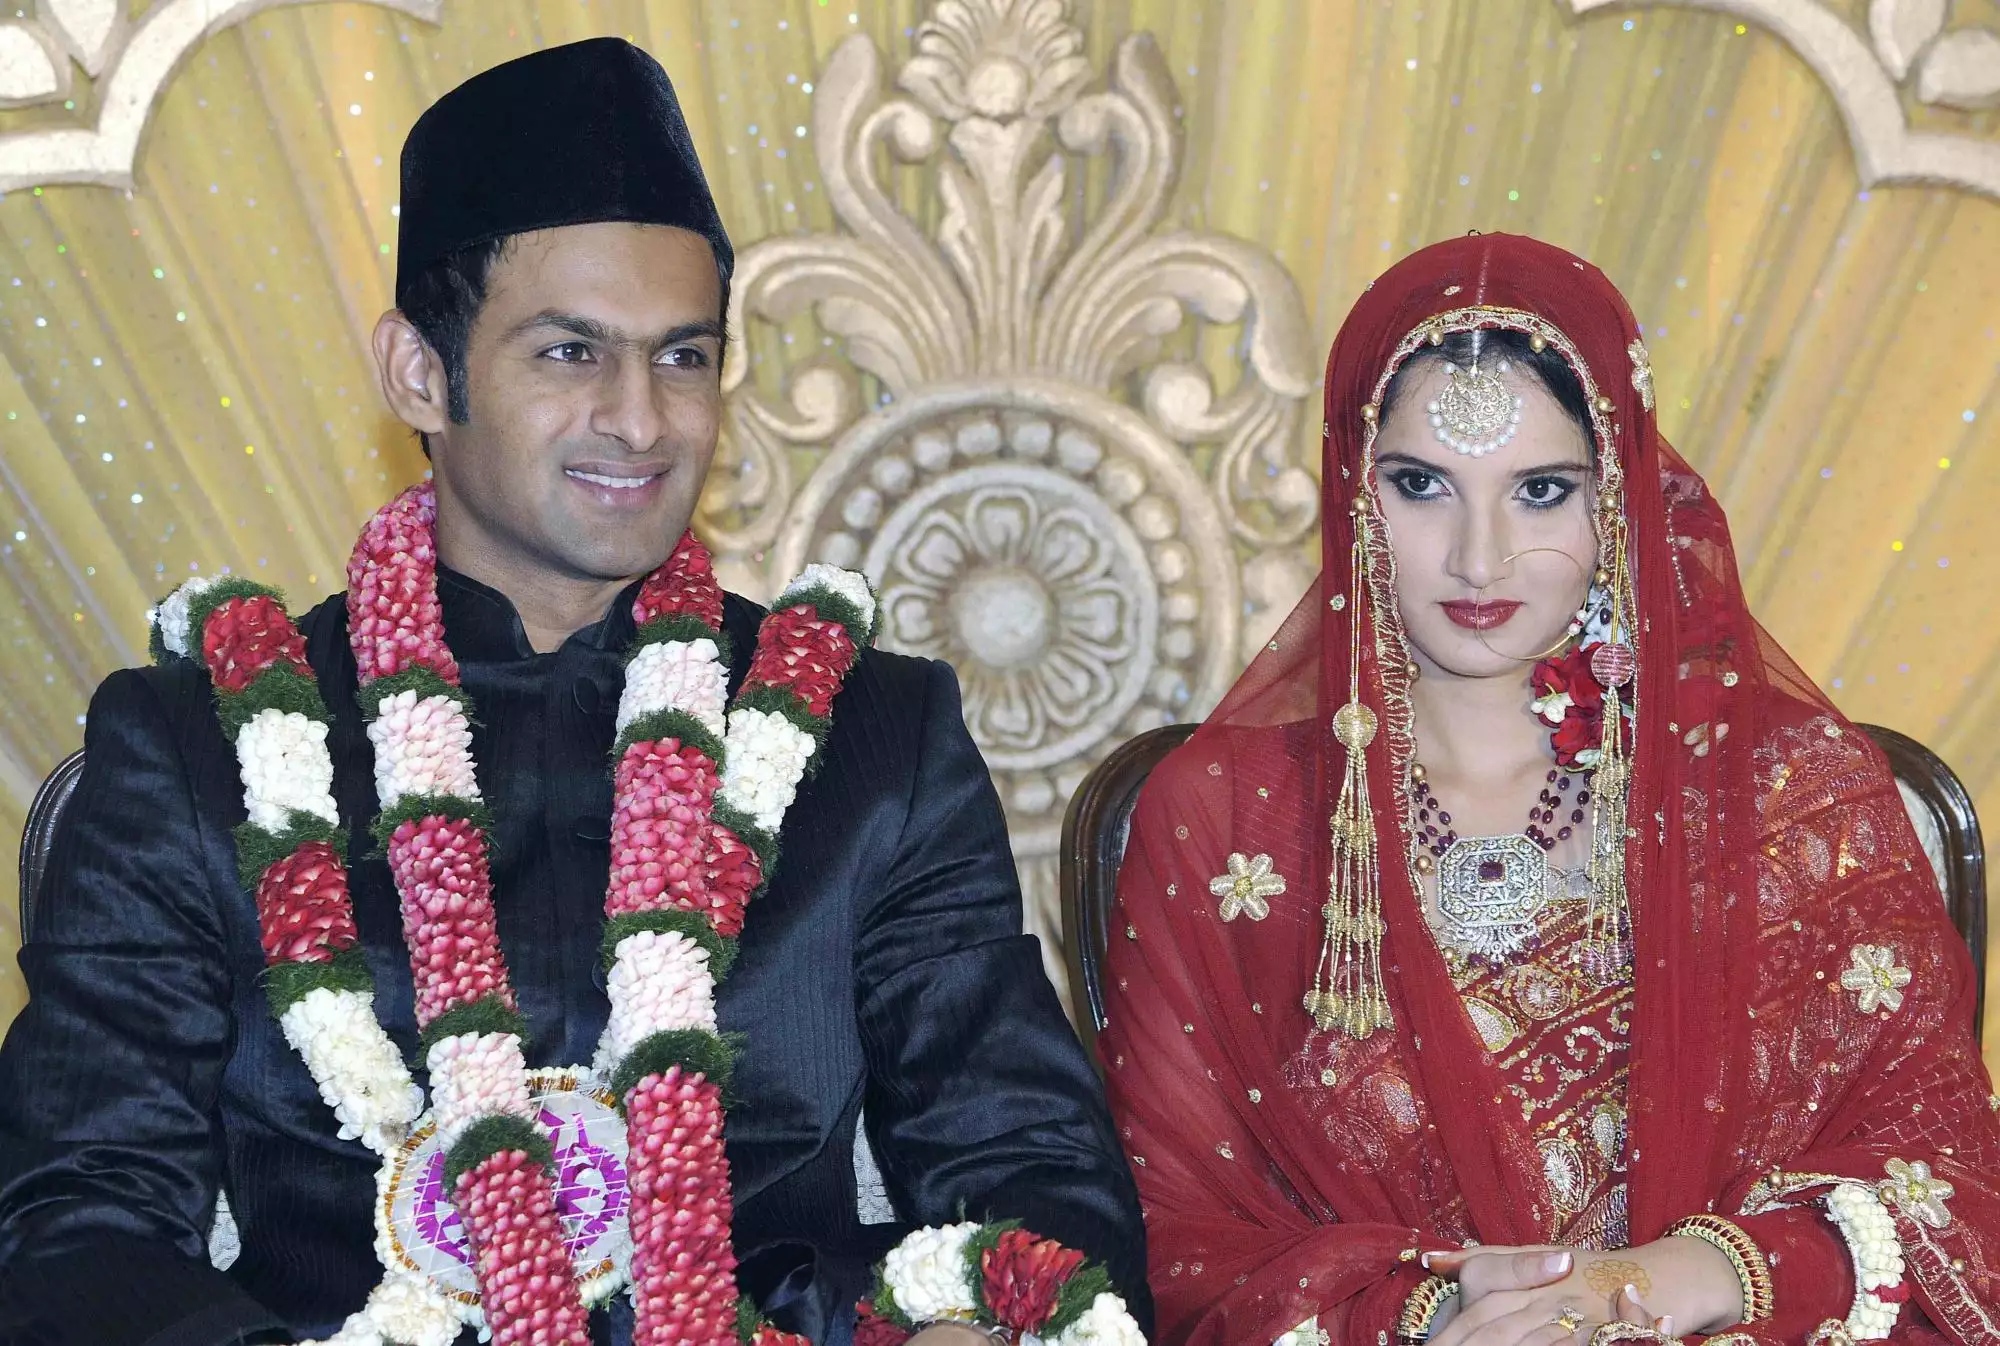 Sania Mirza Ka Bf - Sania Mirza's cryptic Insta post fuels speculations about her separation  from husband Shoaib Malik